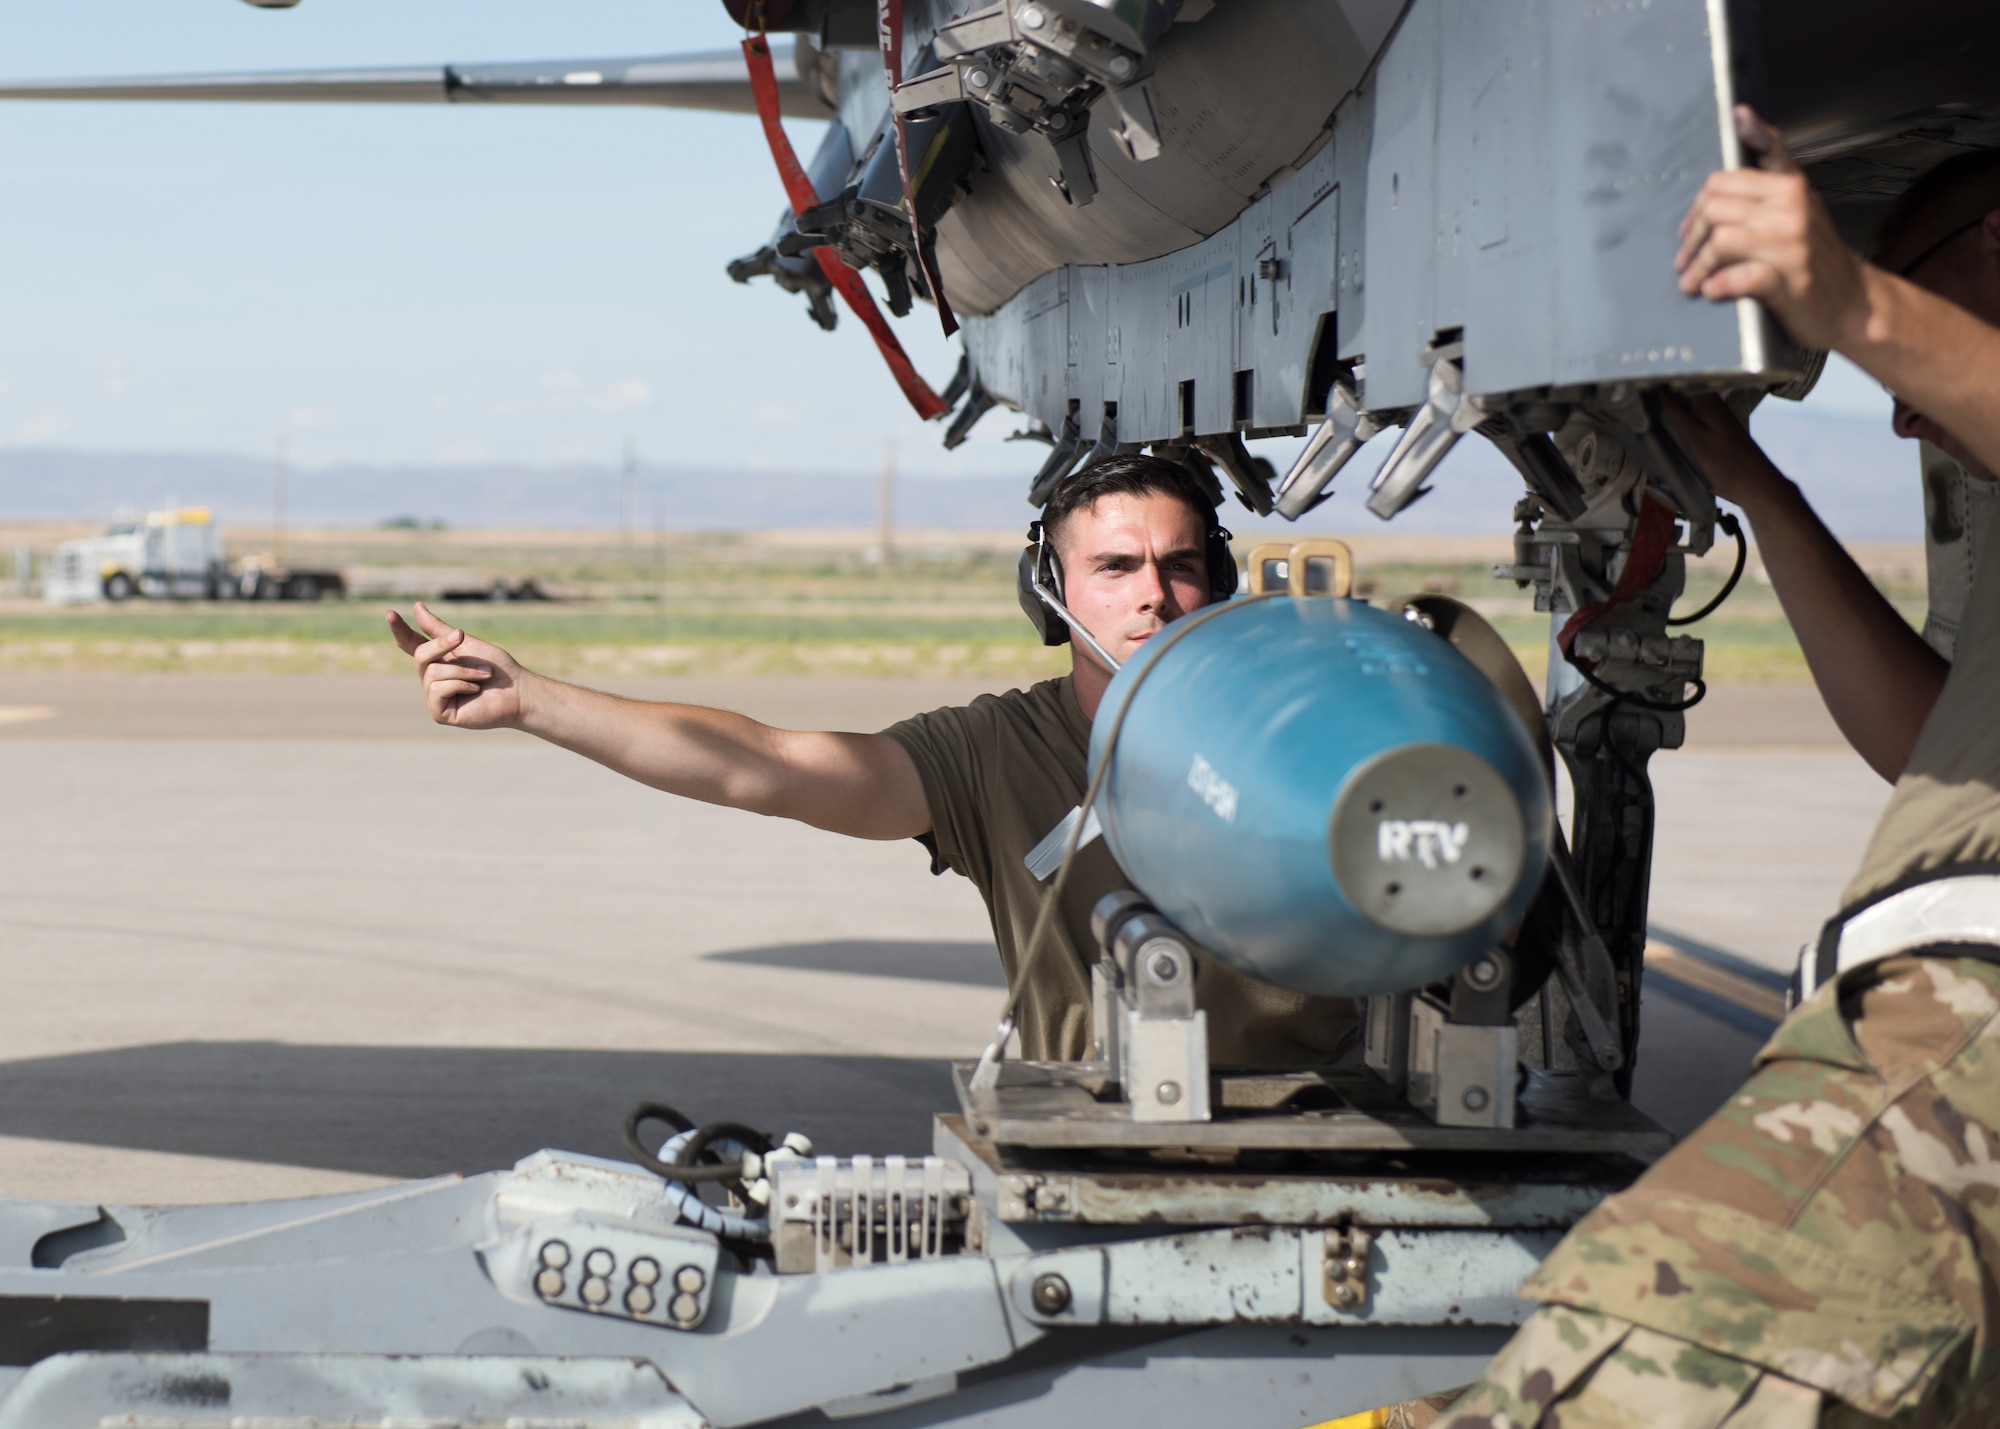 Staff Sgt. Timothy Chouinard, 391st Fighter Squadron, weapopns load crew chief, directs a loading process for an F-15E Strike Eagleduring the Adaptive Basing exercise July 17, 2019, at Mountain Home Air Force Base. This training was done in order for the fighter squadrons to sharpen their Adaptive Basing strategies, enhancing it's potential down range. (U.S. Air Force photo by Senior Airman Tyrell Hall)